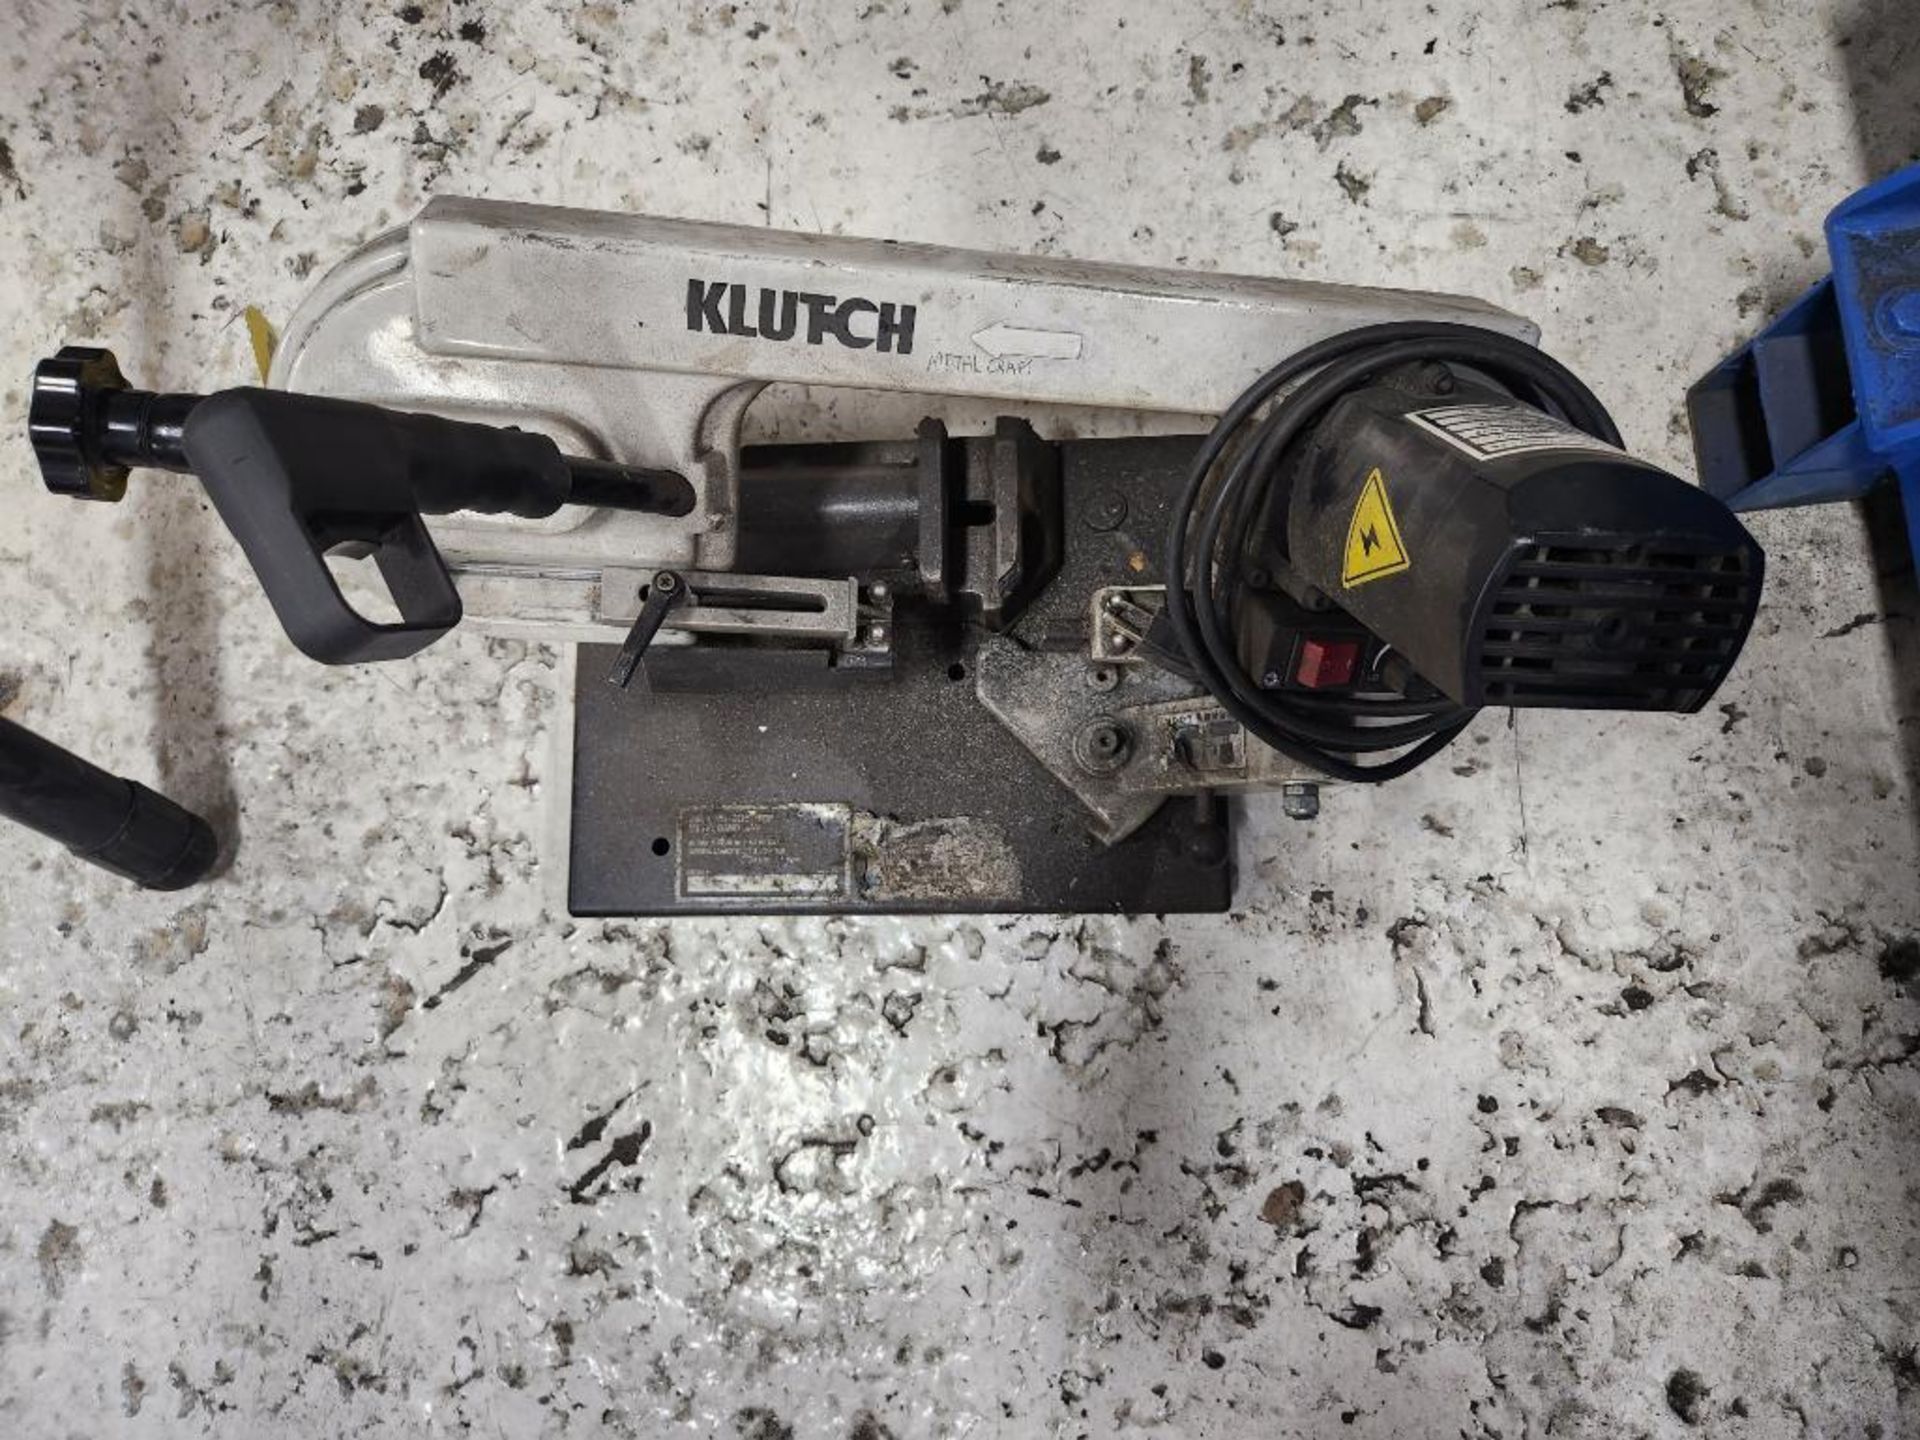 Klutch Bench Top Band Saw, 52" Blade, 3" - 4" Cut Capacity, Model 49466, S/N A18012029 - Image 2 of 4